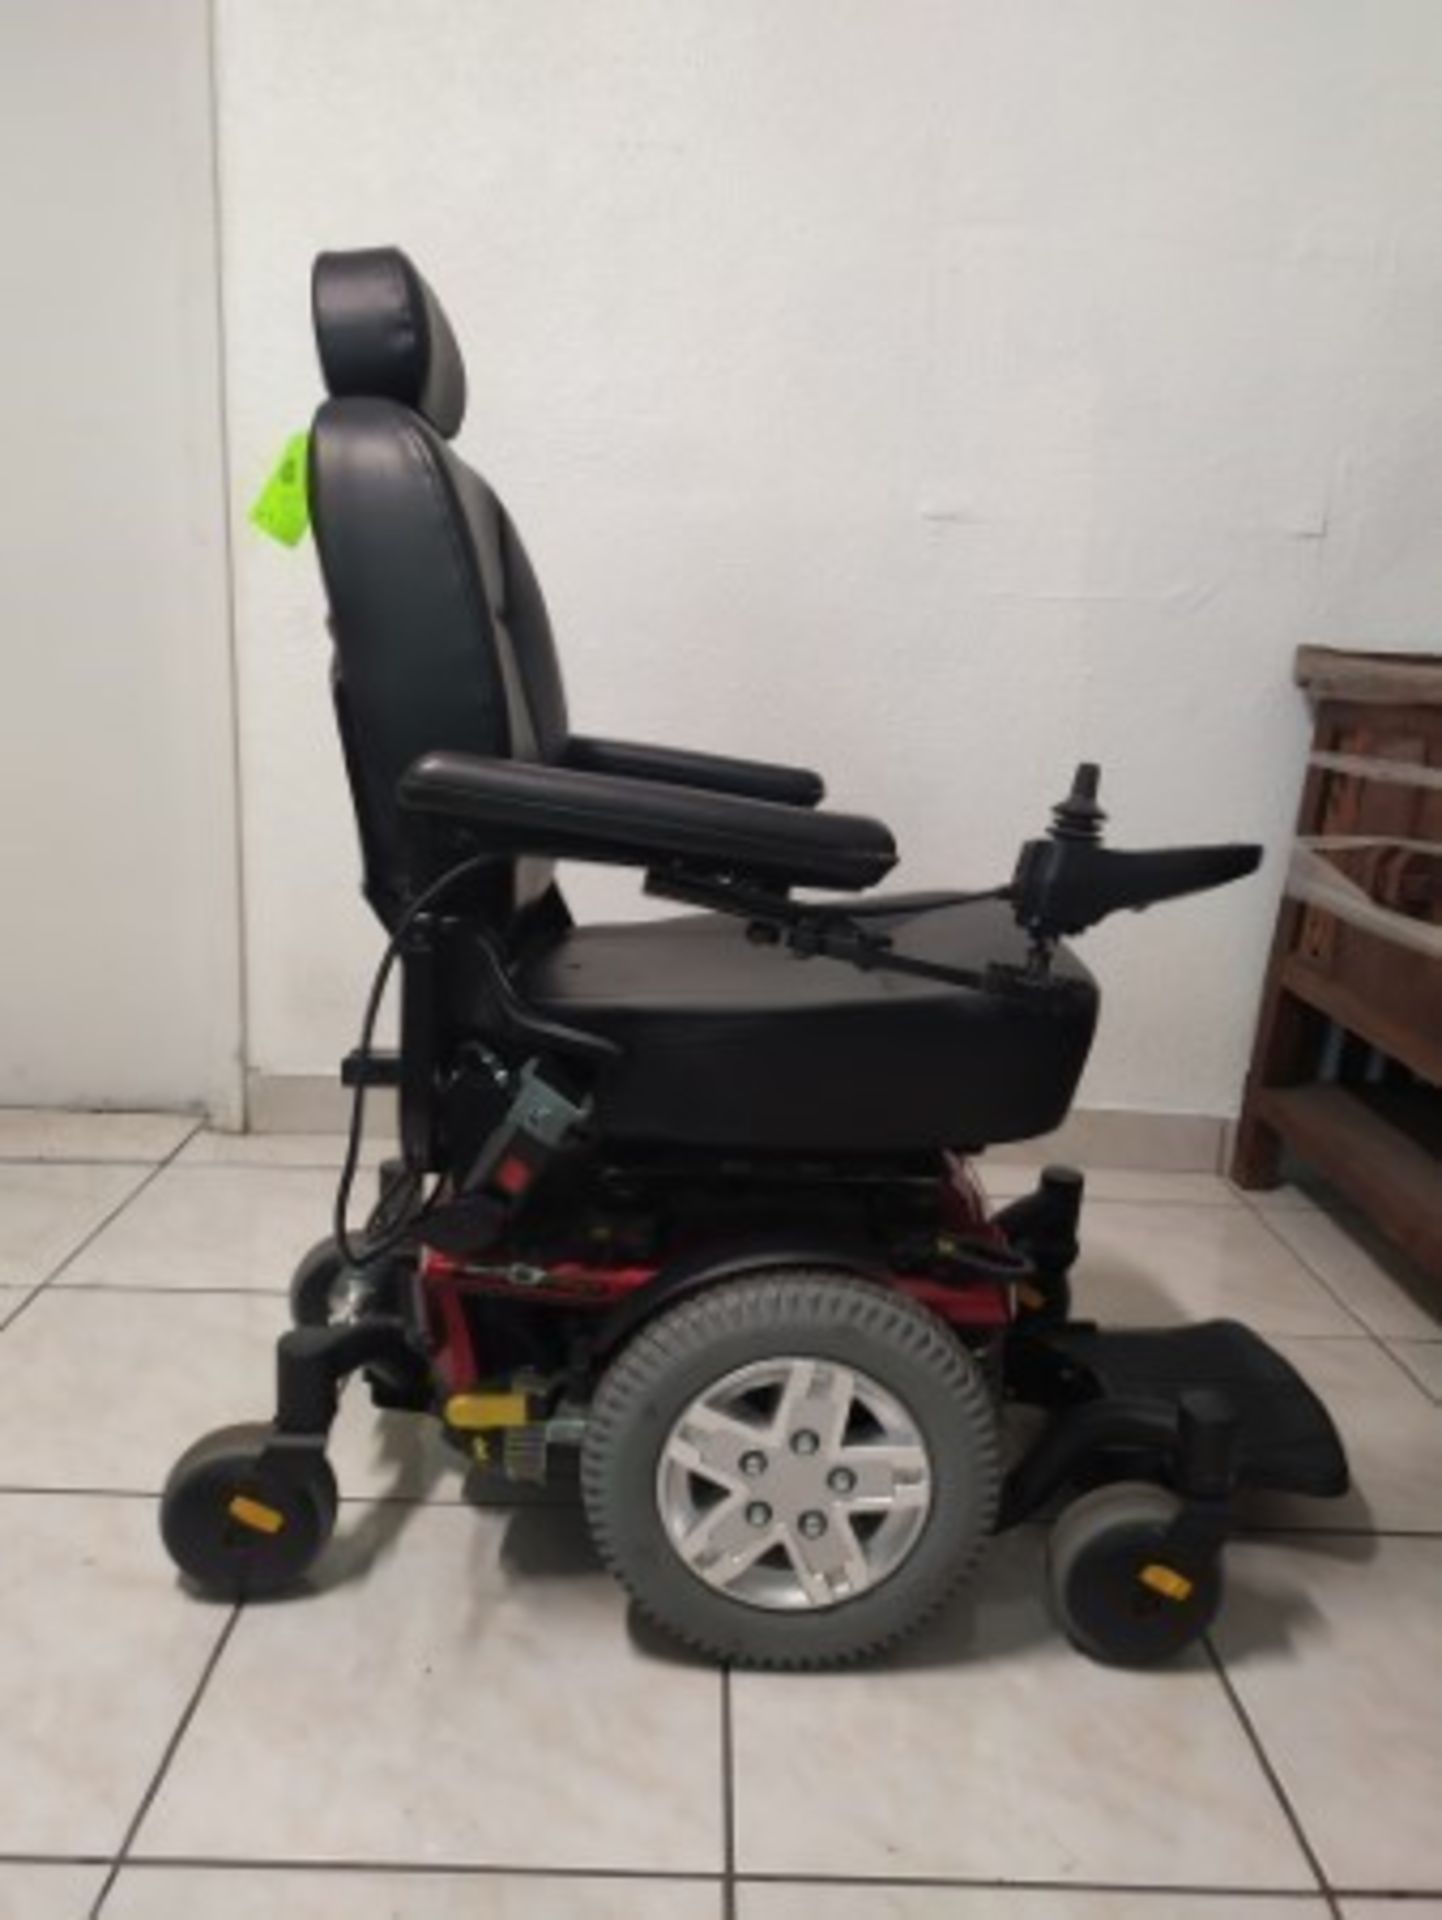 2017 QUANTUM Q6 EDGE 6-WHEEL POWER CHAIR - RED - 400LB CAPACITY - SERIAL No. JB622617126020 (CHARGER - Image 3 of 4